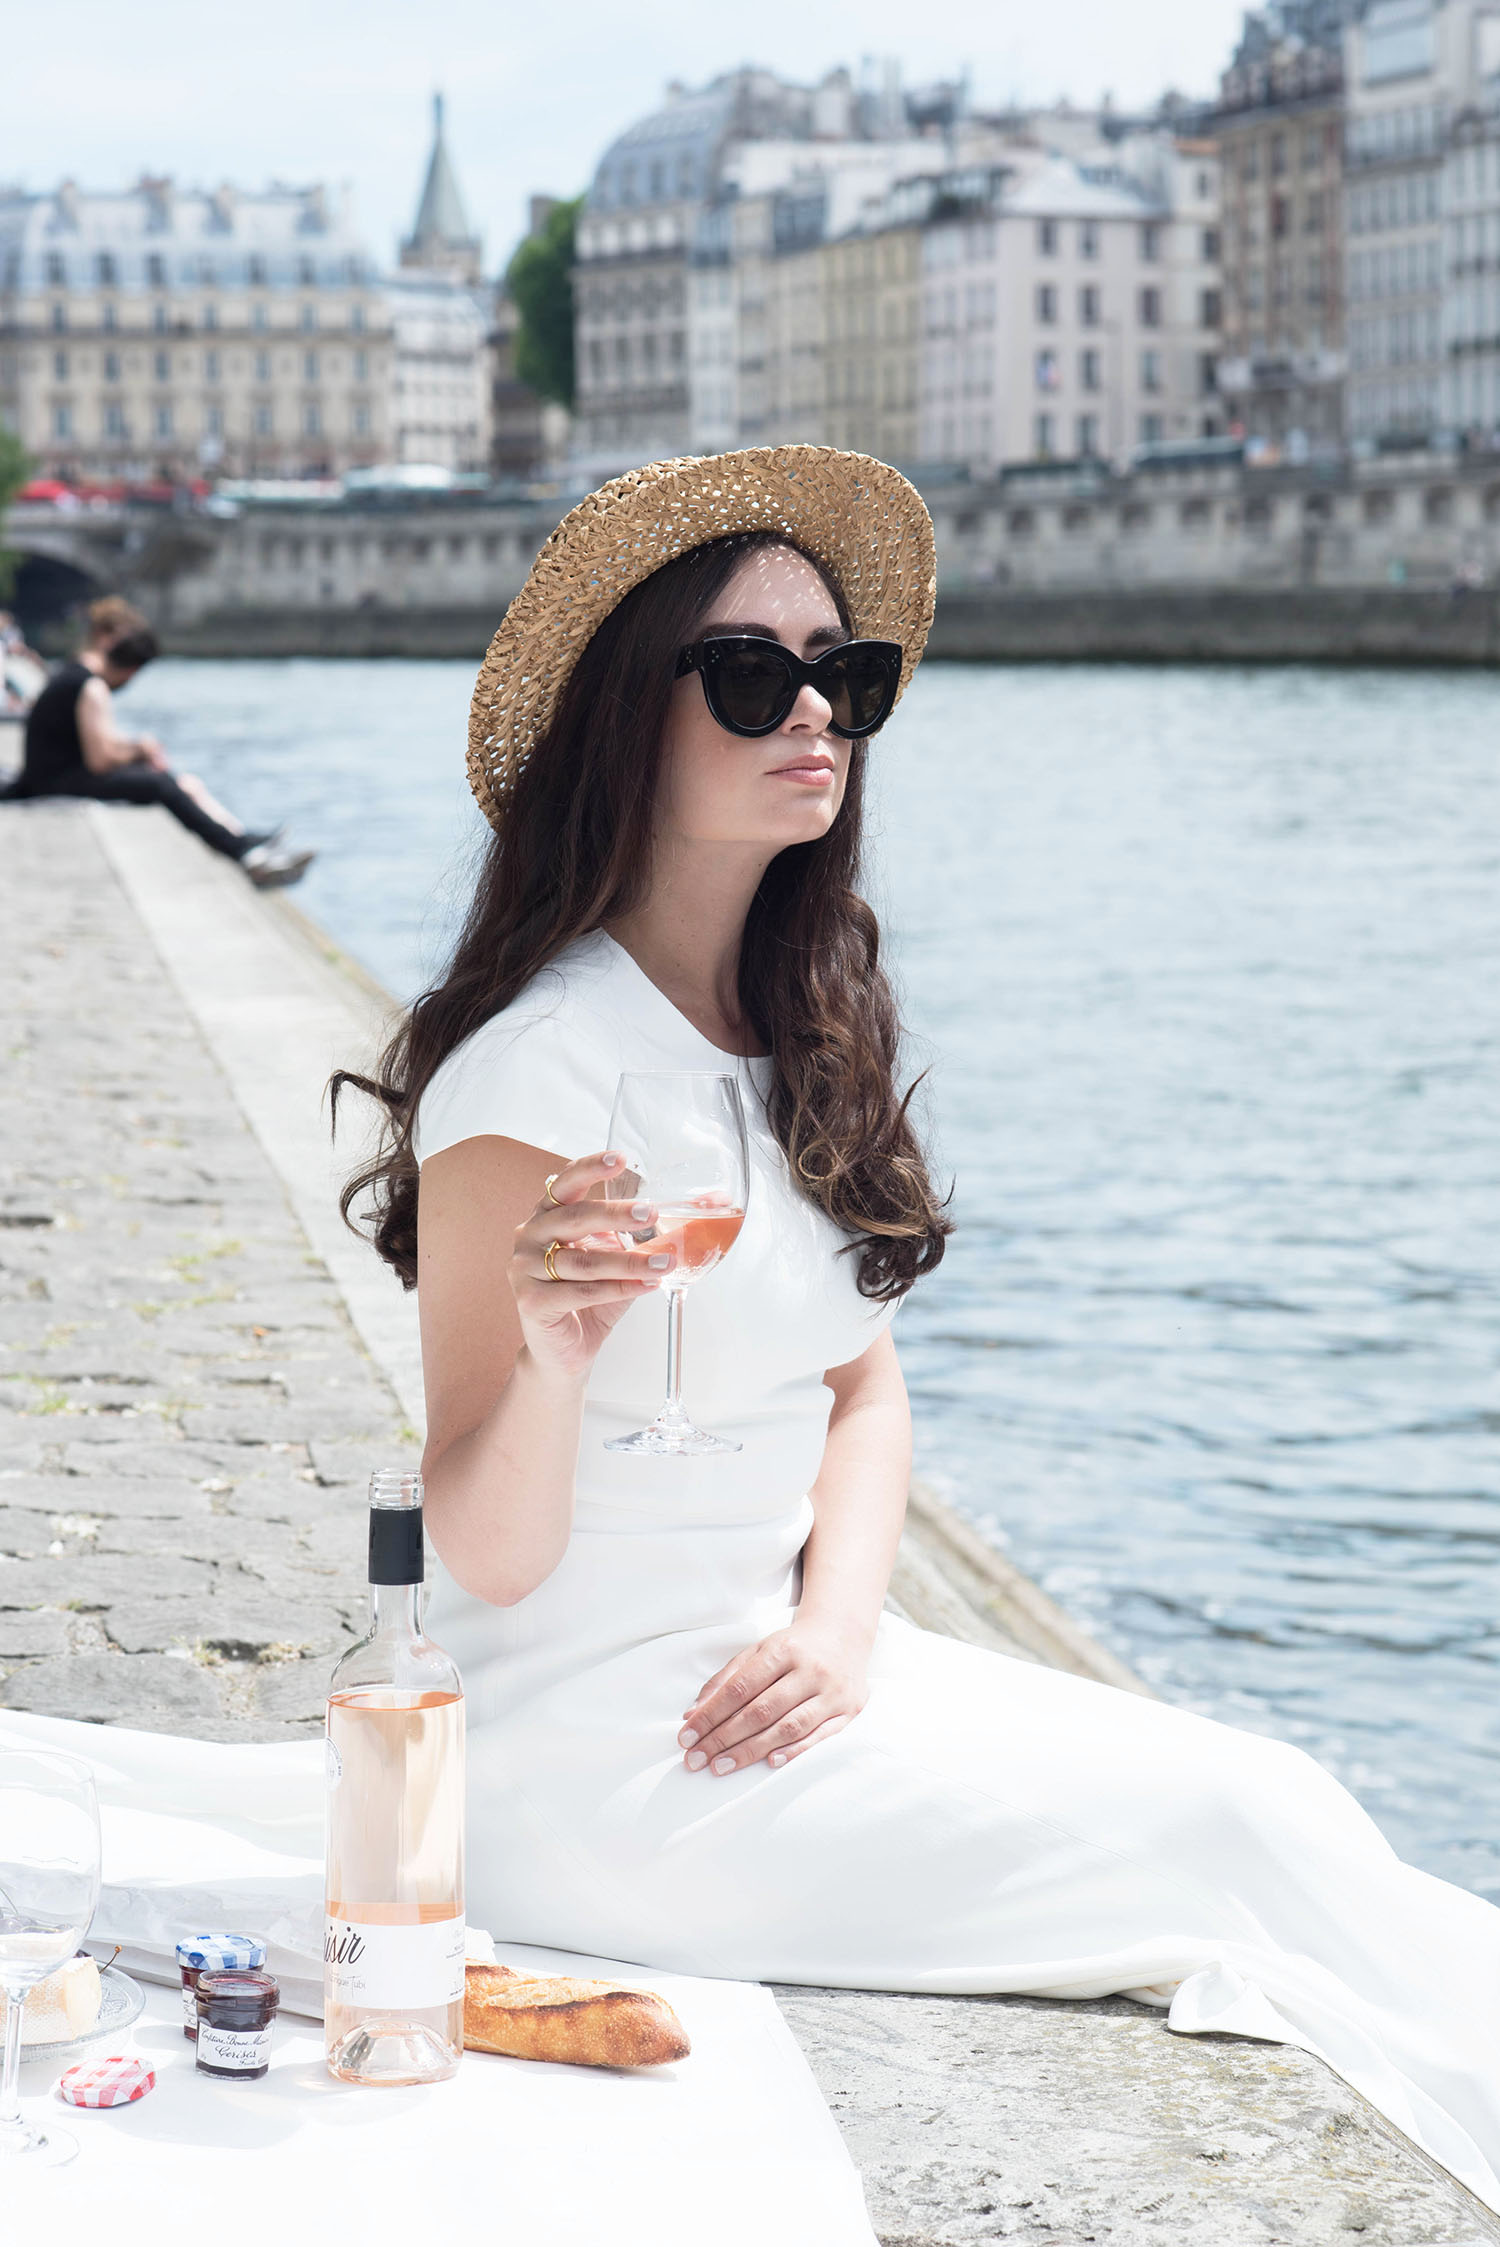 Style blogger Cee Fardoe of Coco & Vera sits on the banks of the Seine river in Paris wearing an Ivy & Oak white dress